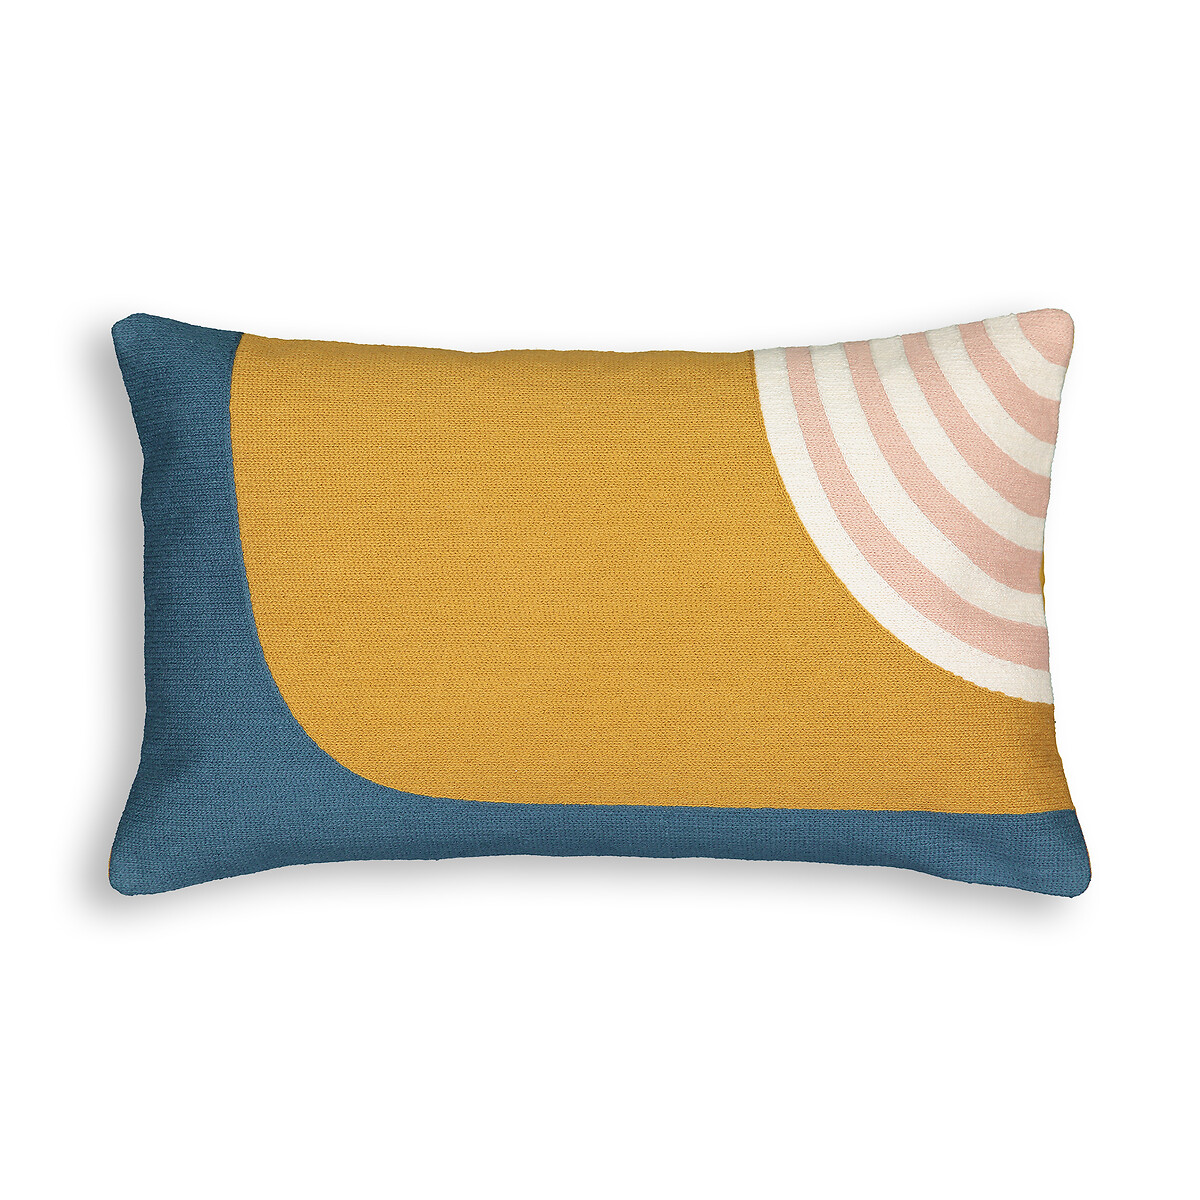 Wavy Embroidered Cushion Cover